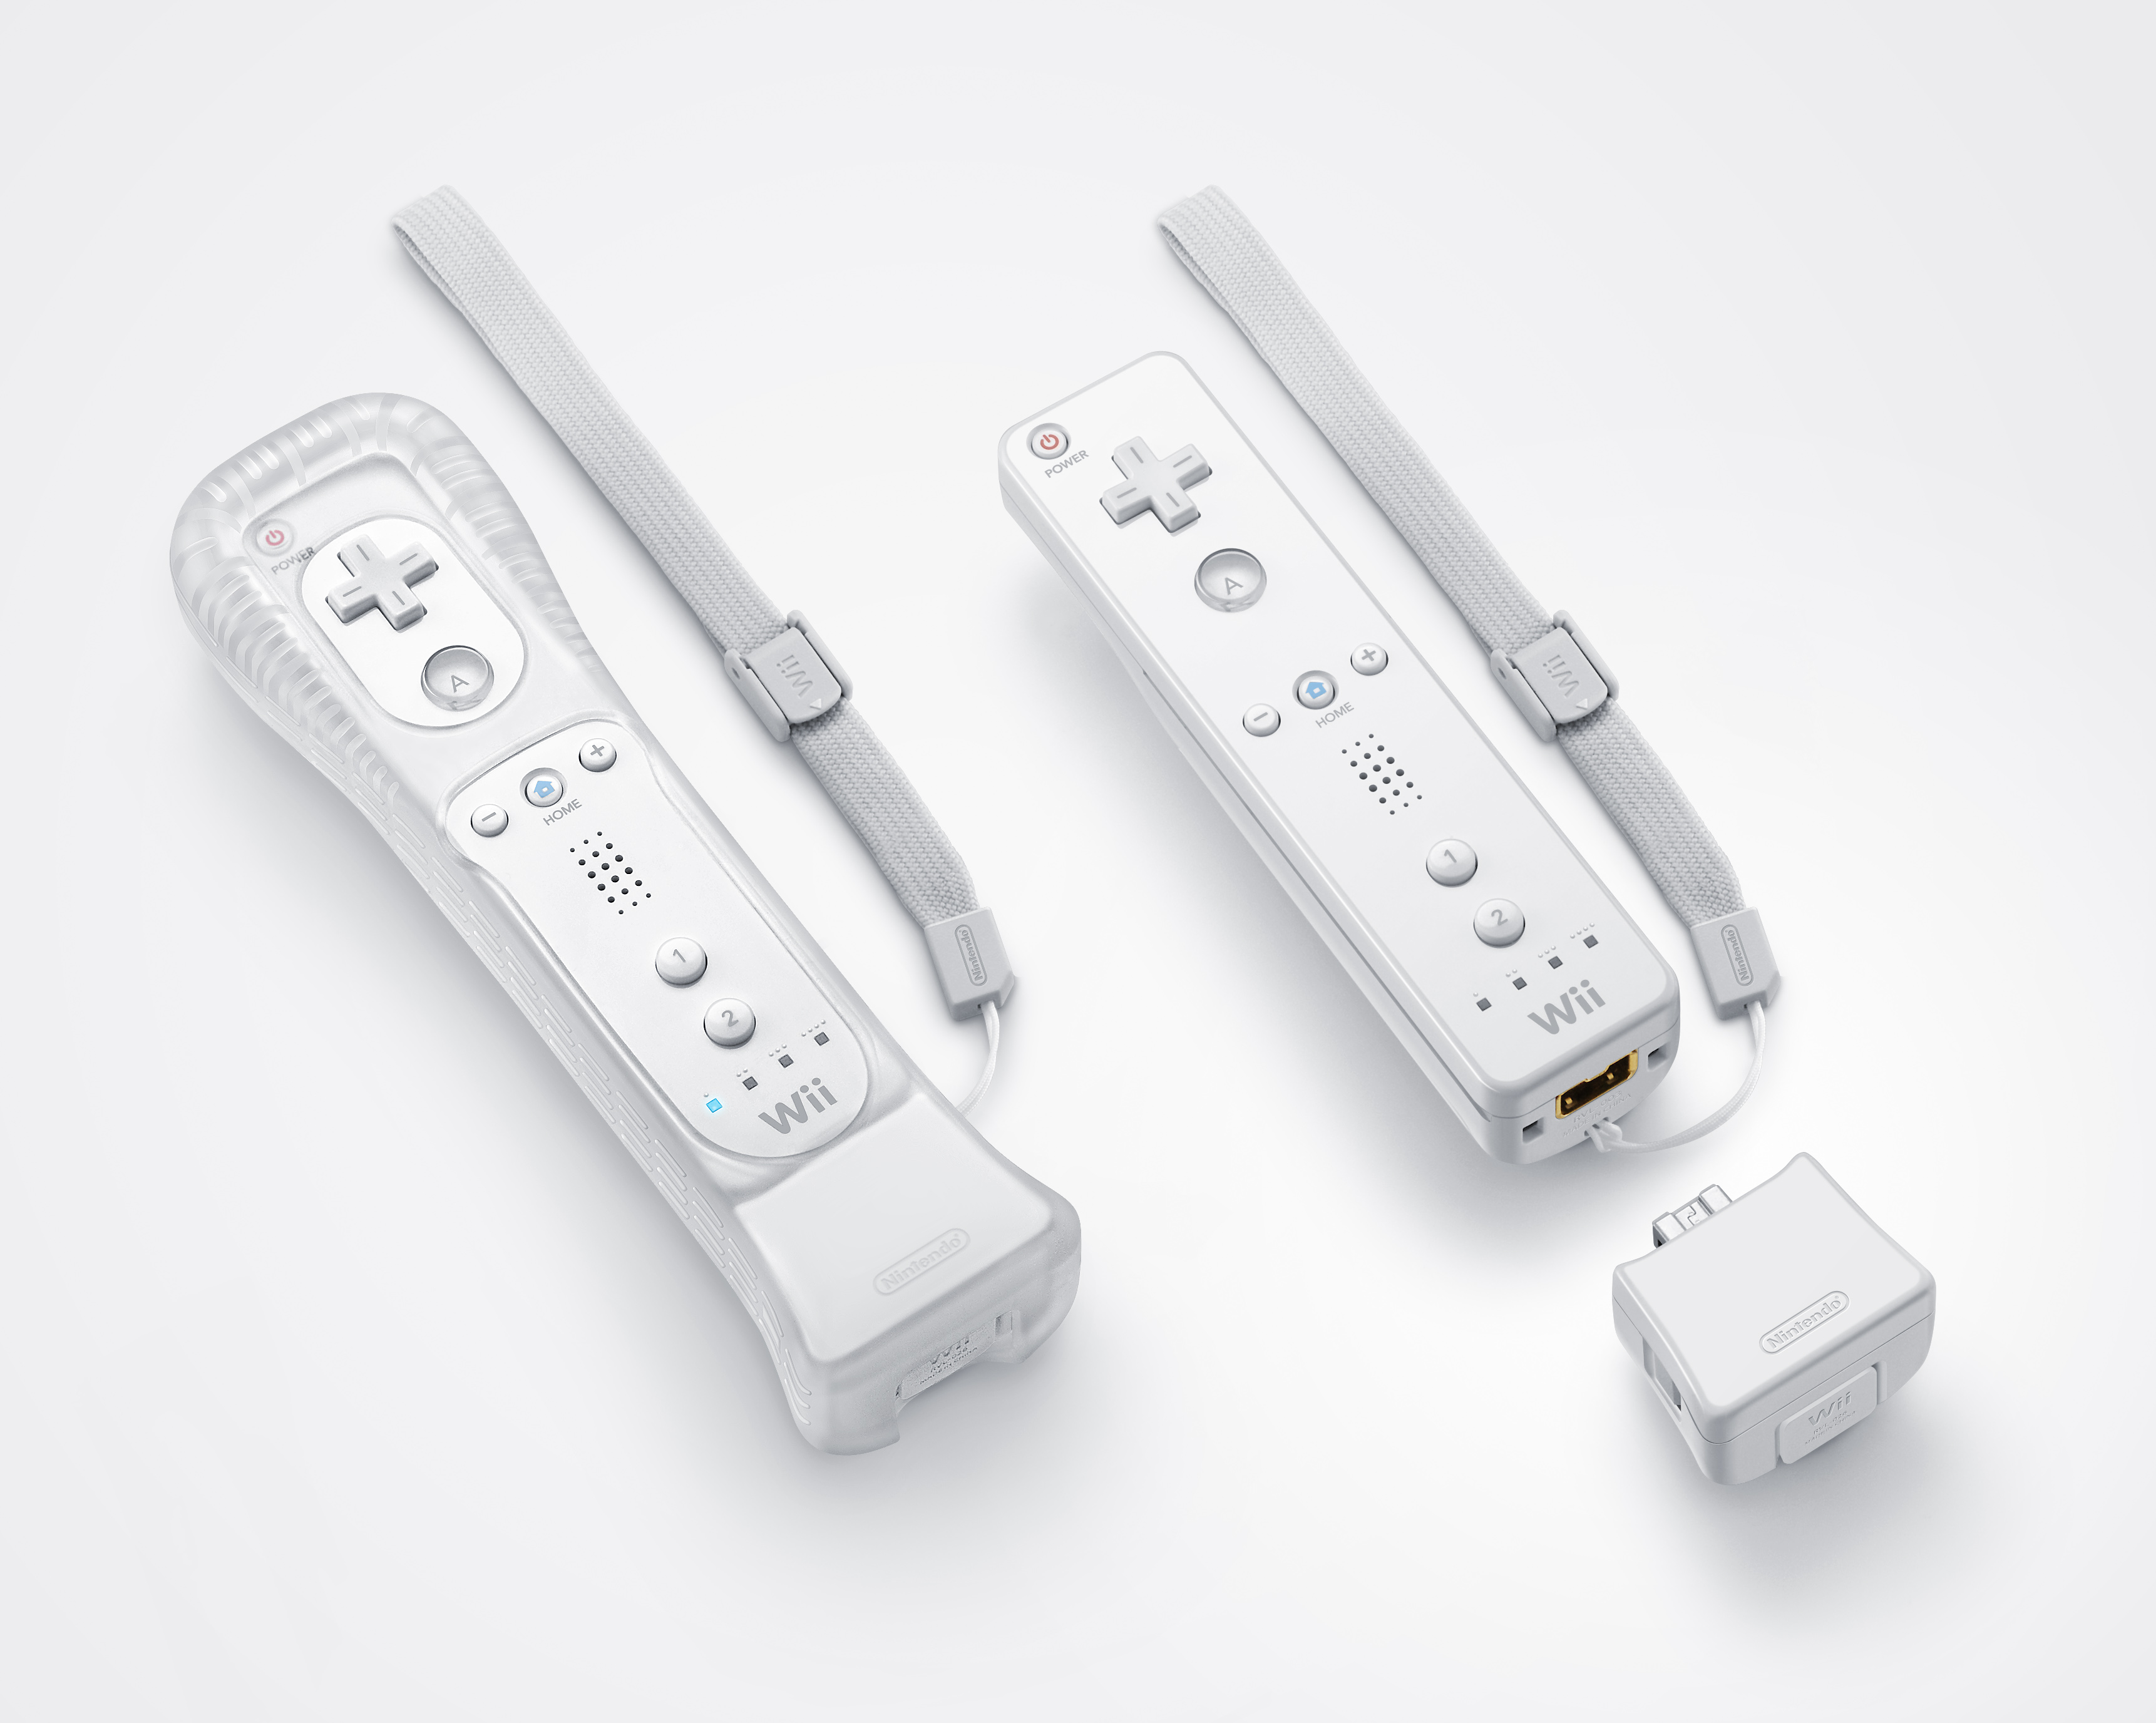 Up Close and Personal with Wii MotionPlus